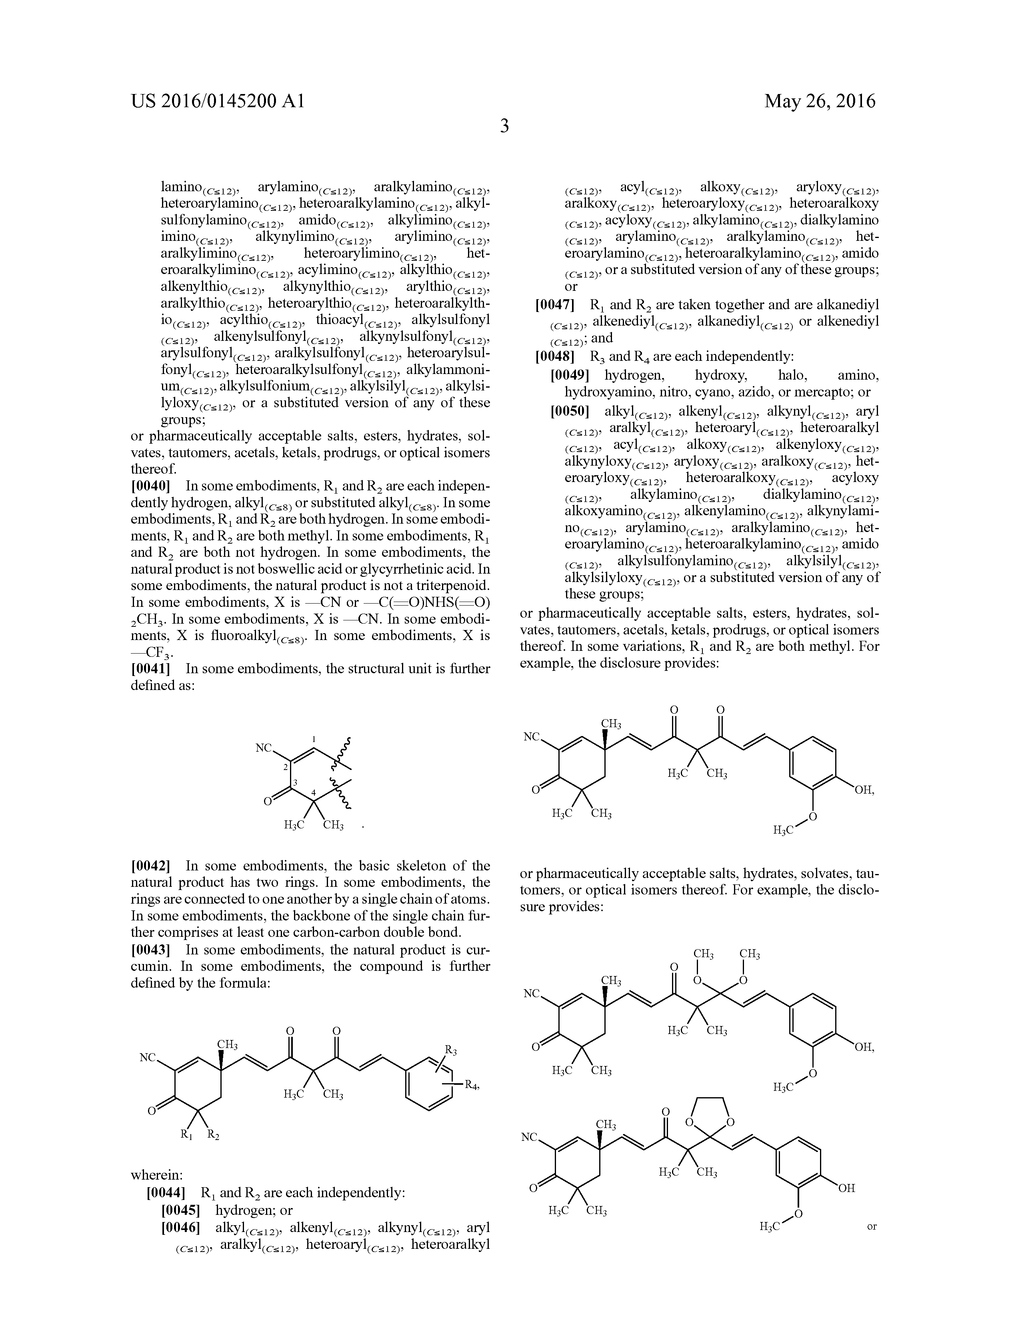 NATURAL PRODUCT ANALOGS INCLUDING AN ANTI-INFLAMMATORY CYANOENONE     PHARMACORE AND METHODS OF USE - diagram, schematic, and image 28